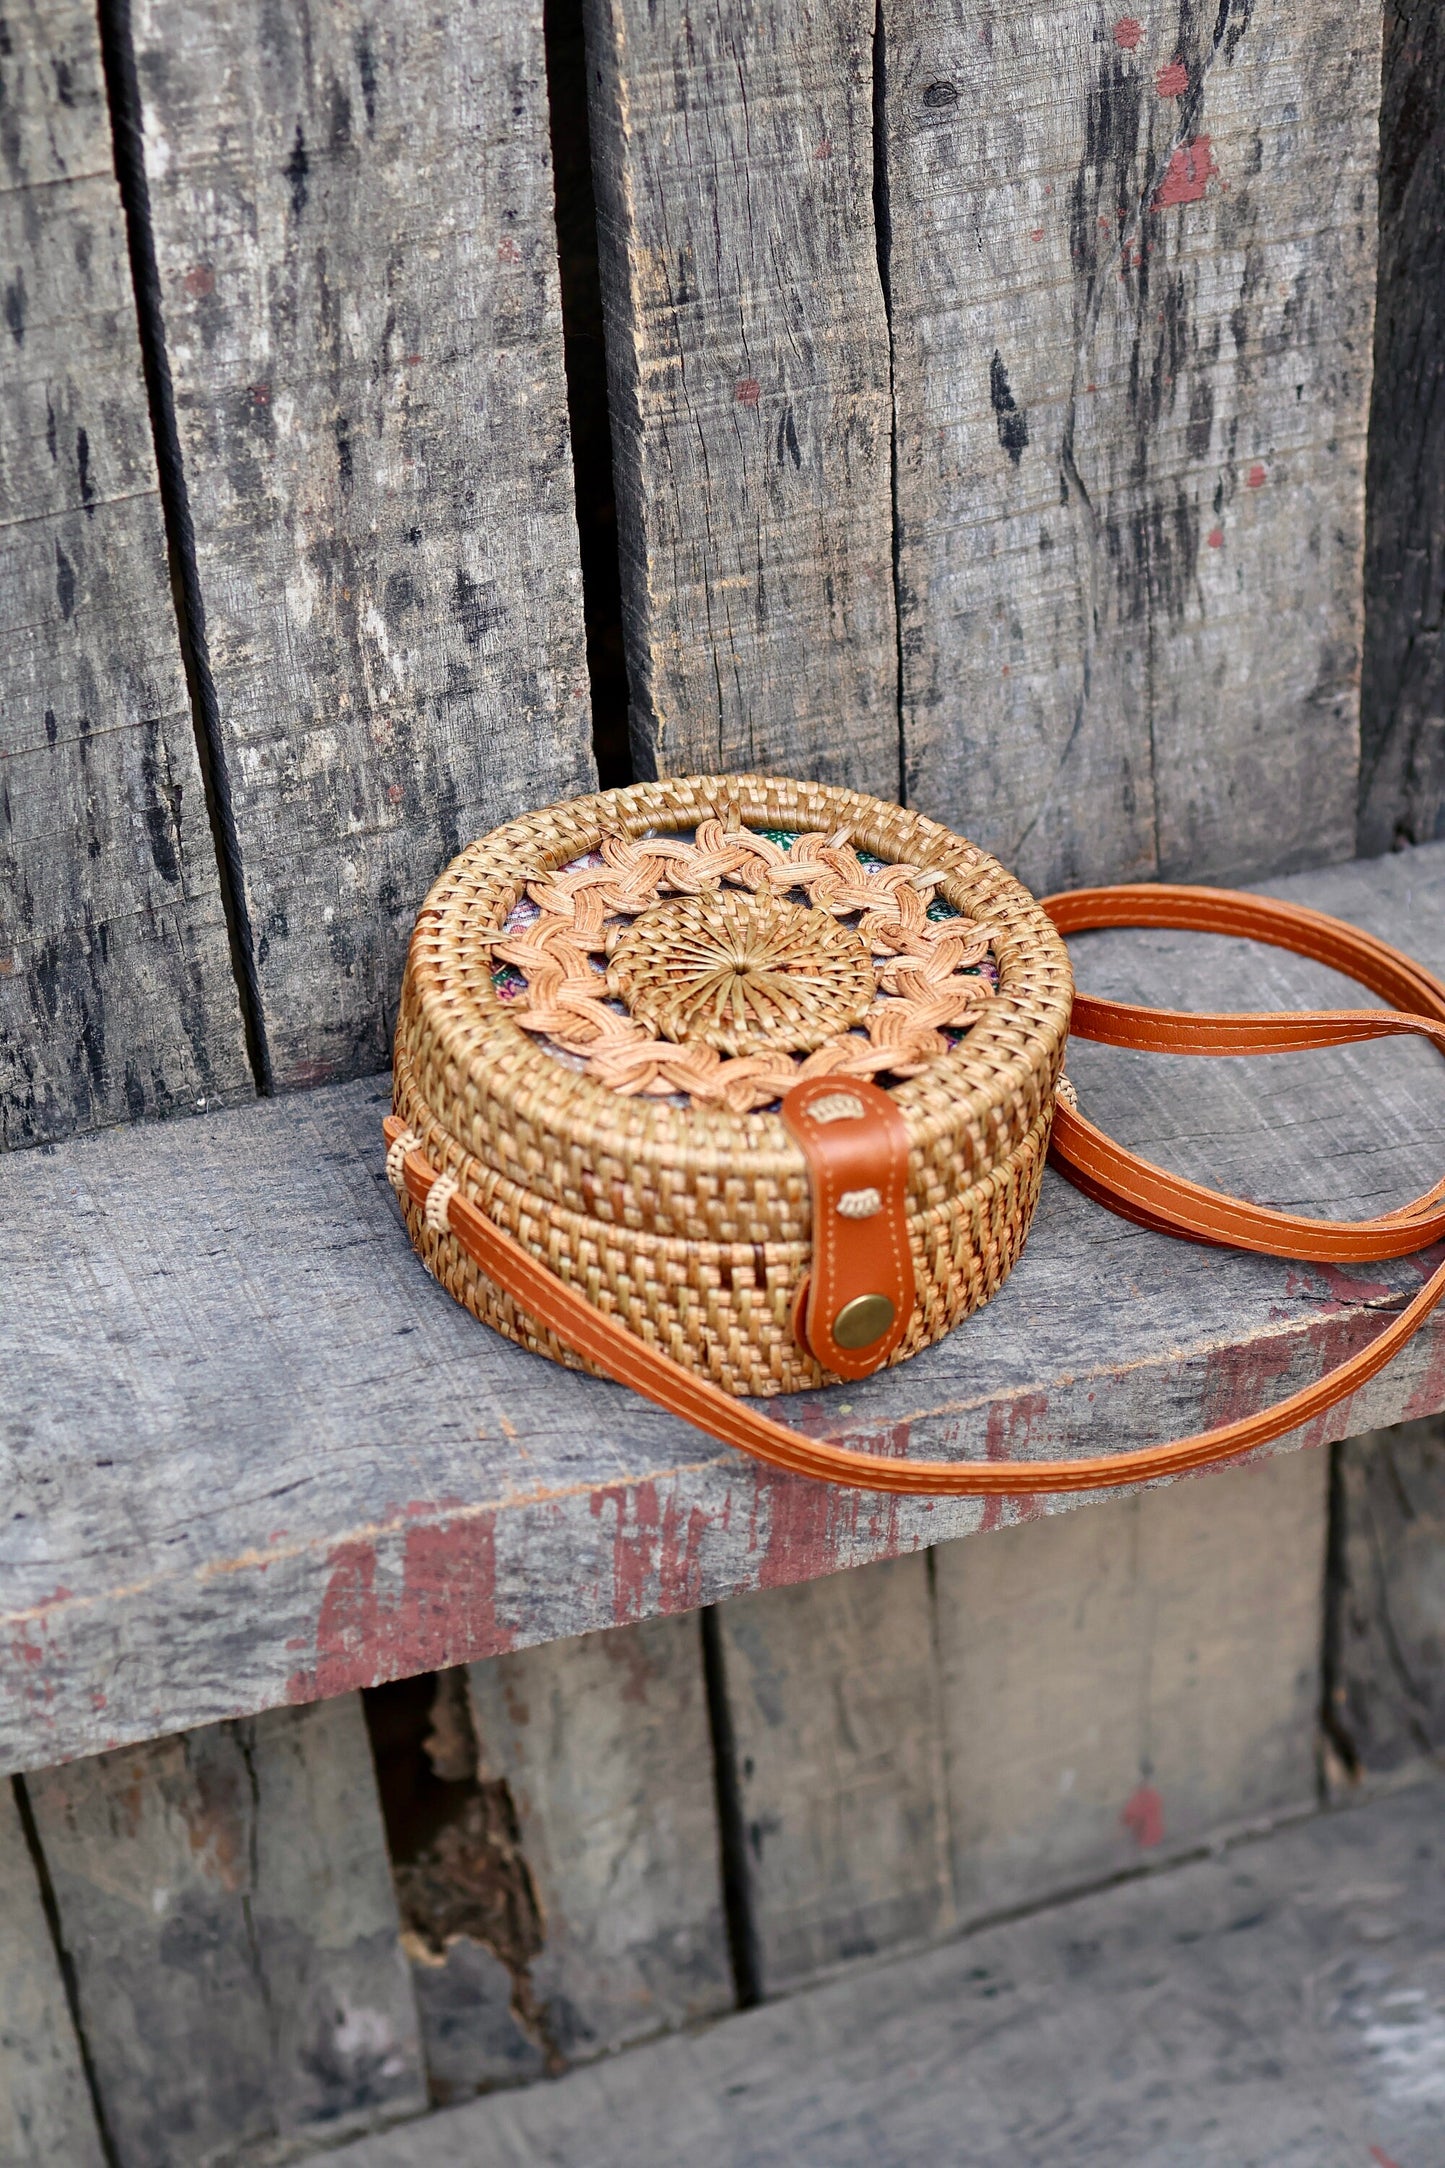 Round Rattan Bag with Braid Pattern, Bali Bags, Handwoven Crossbody Purse, Braided Straw Bag, Bali Sling Bags Rattan Bags Gift for her